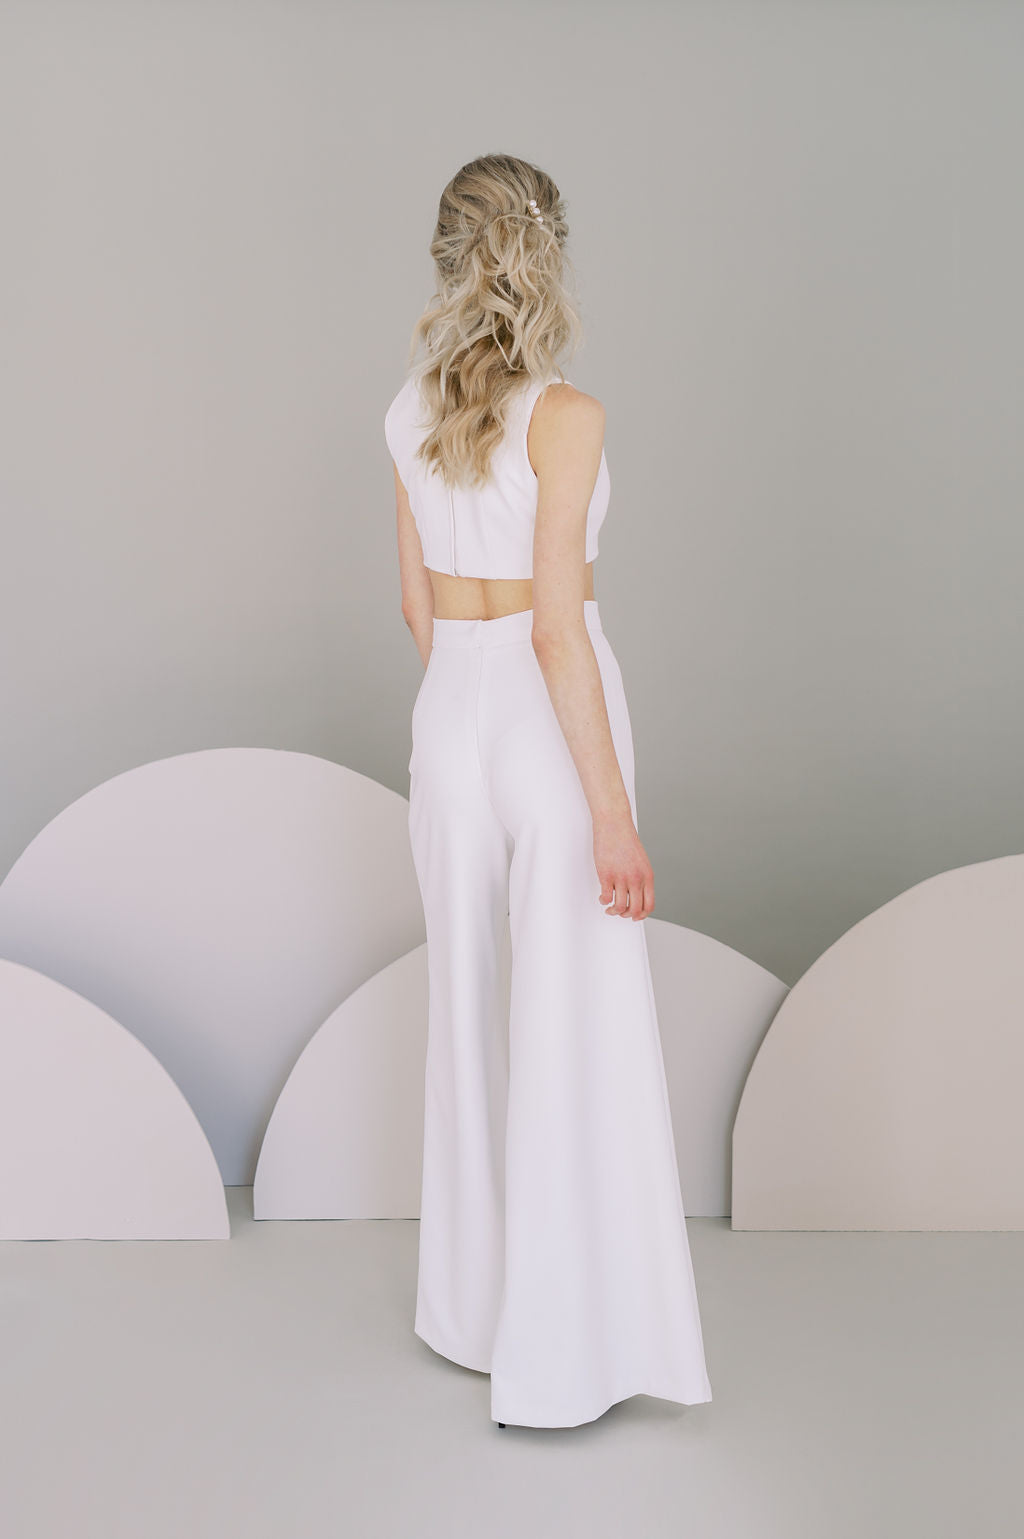 Wedding crop top in stretch crepe. Shown with crepe palazzo pants. Custom made by Catherine Langlois, Toronto, Canada.